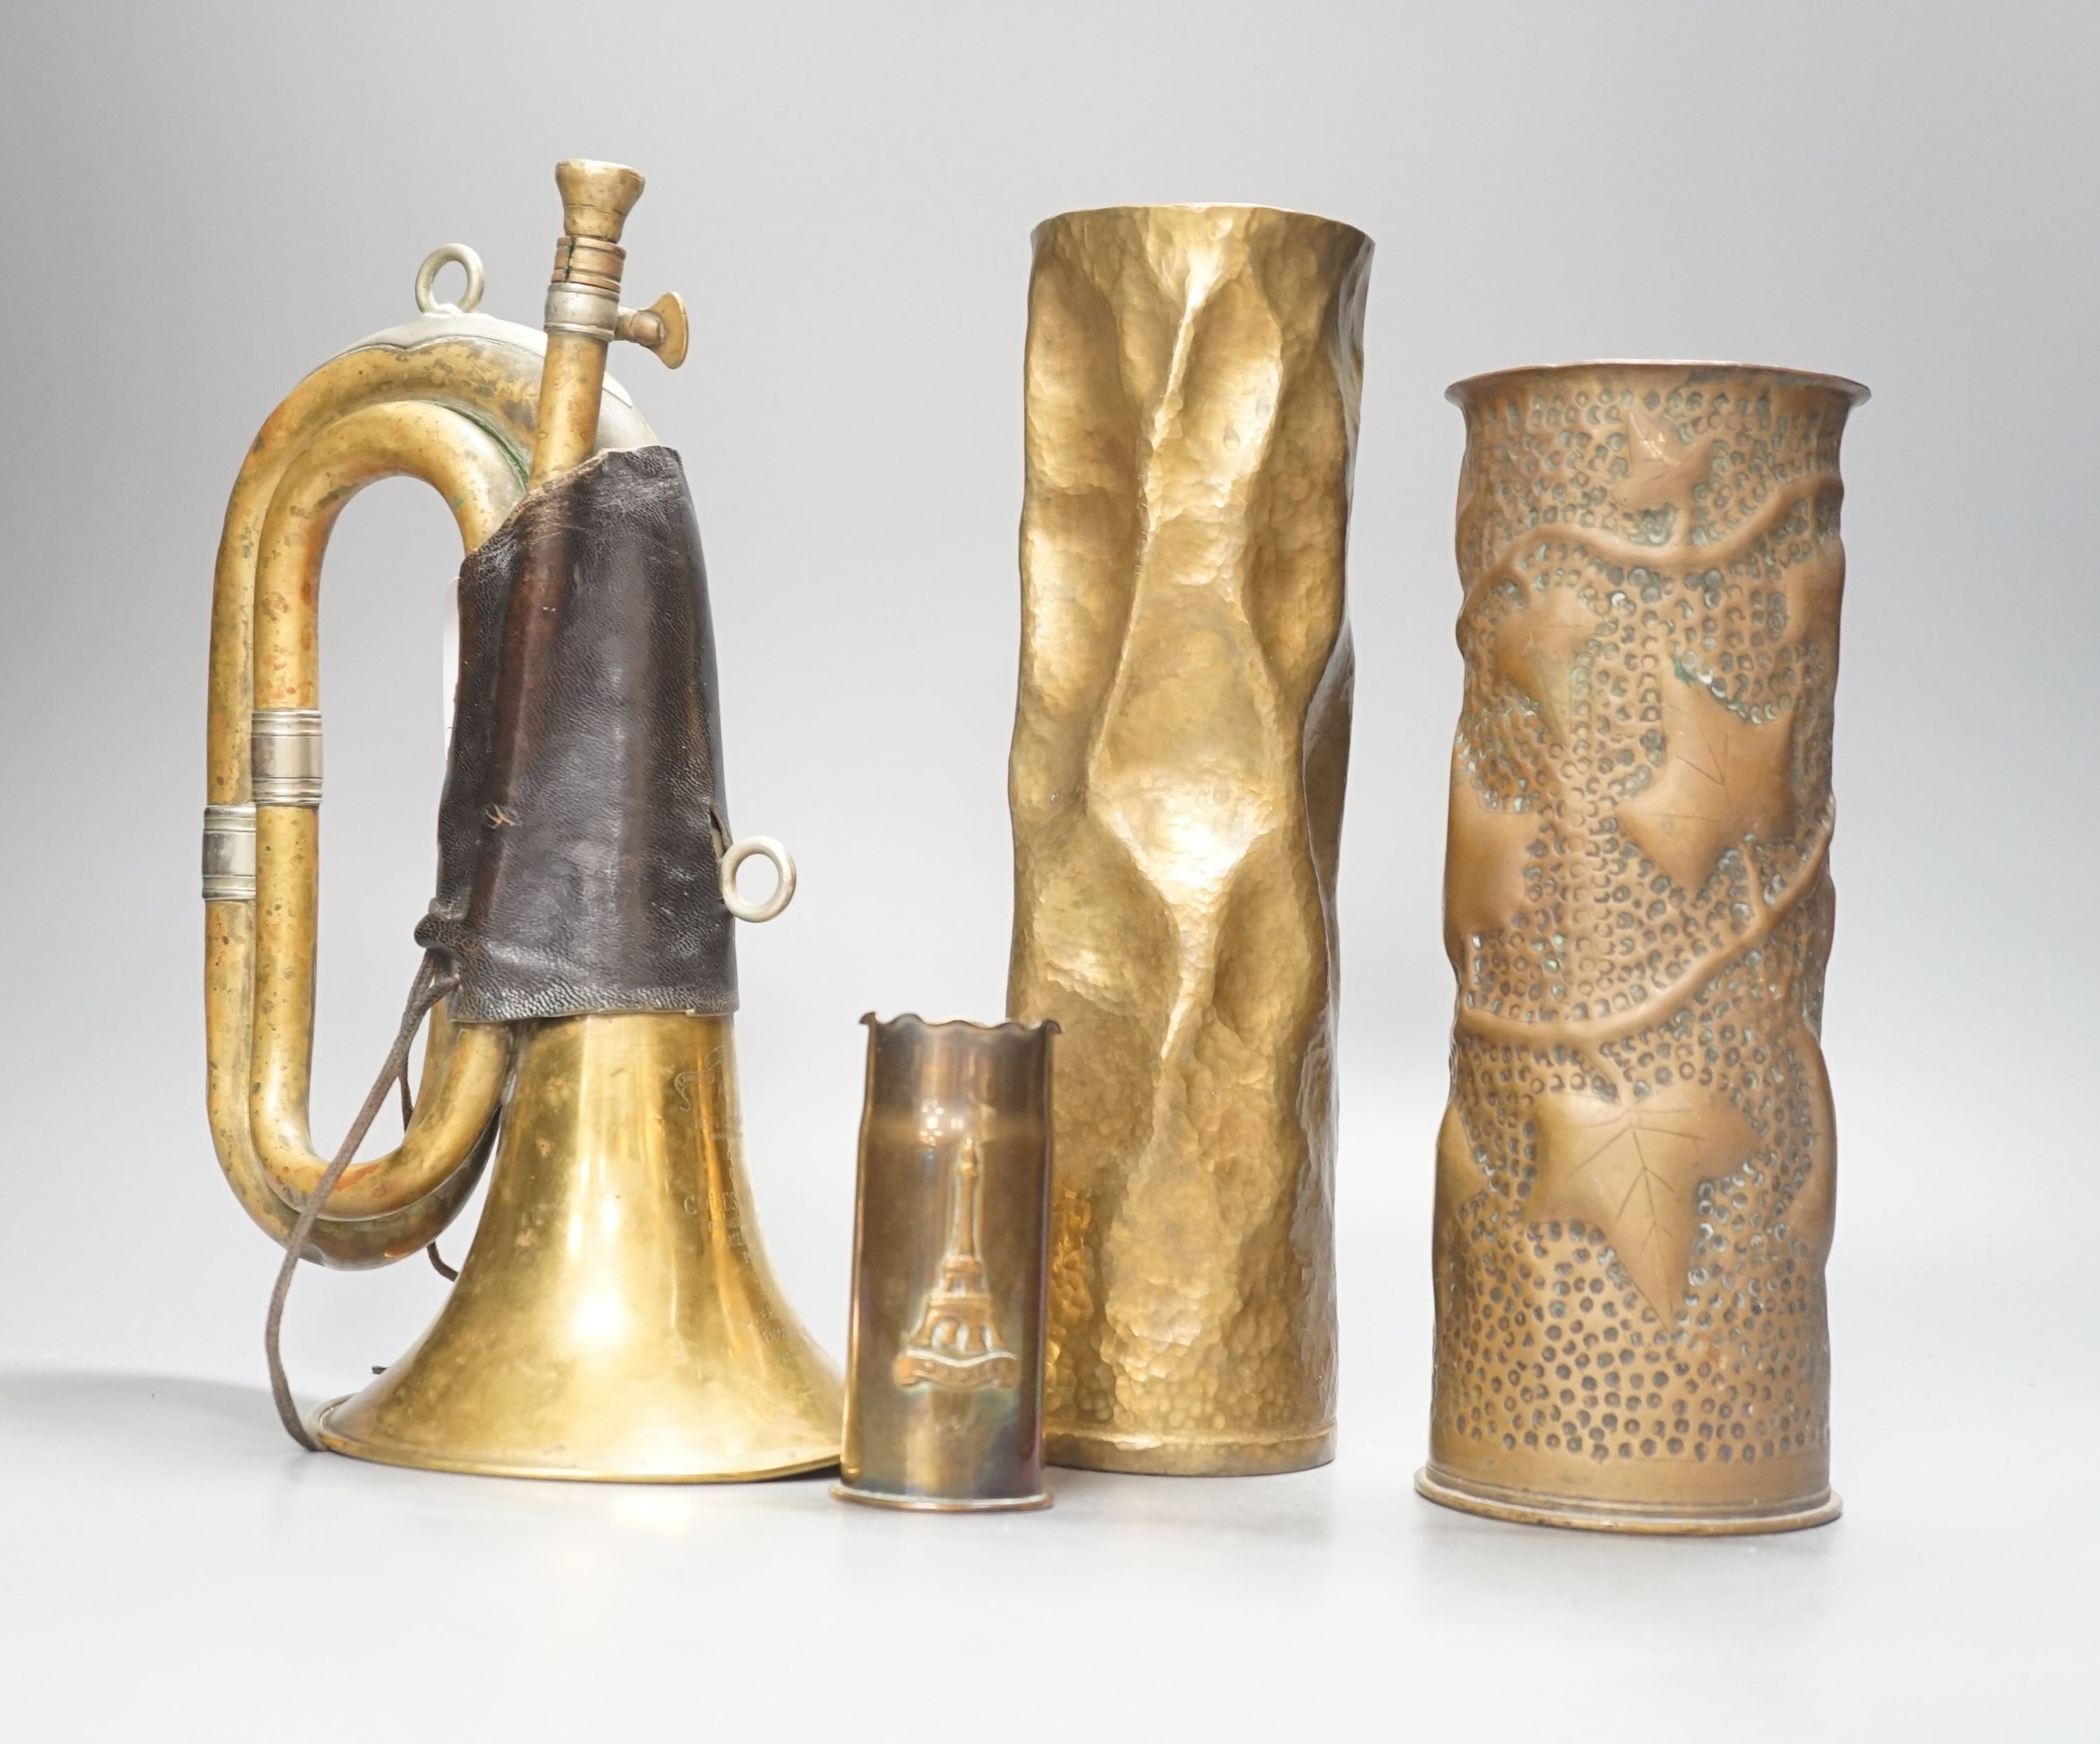 Three WWI brass trench art shell cases and a Couesnon & Cie brass bugle